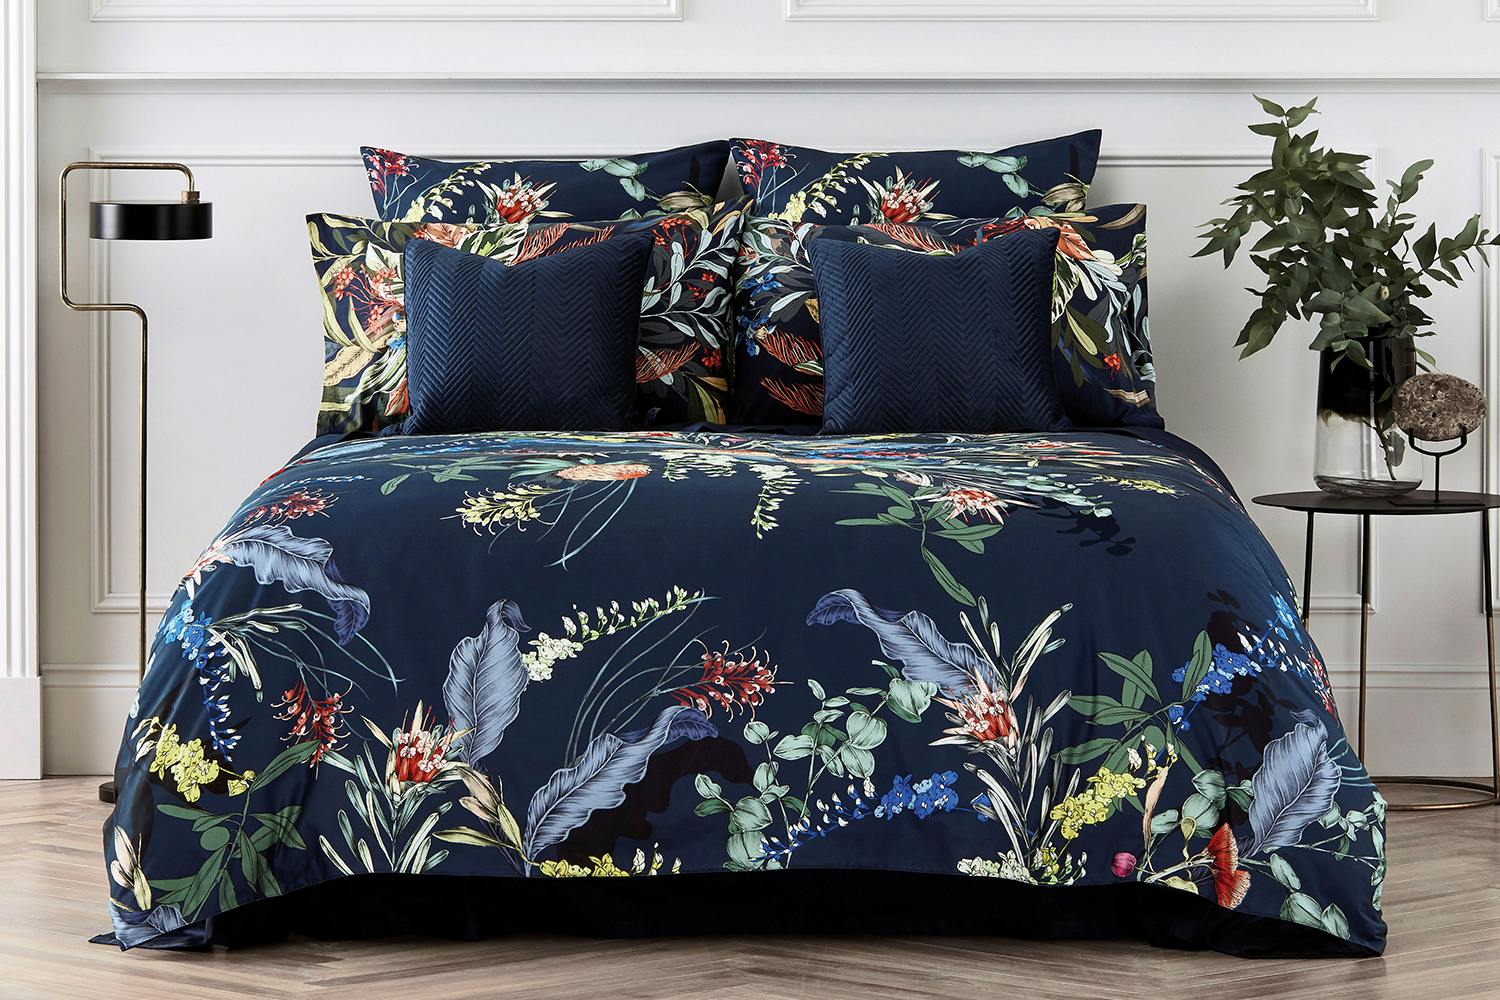 Willow Cove Duvet Cover Set By Sheridan Harvey Norman New Zealand